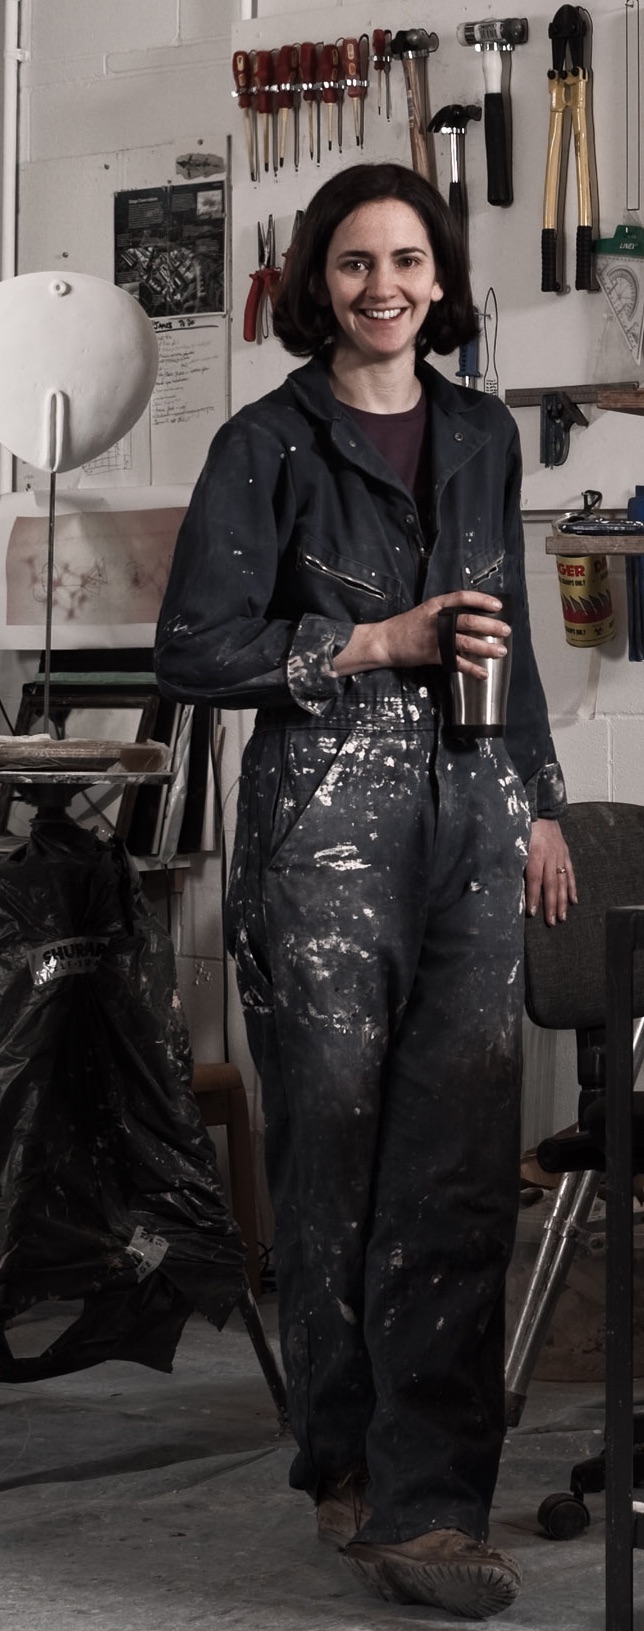 A female sculptor wearing paint-spattered overalls in her studio